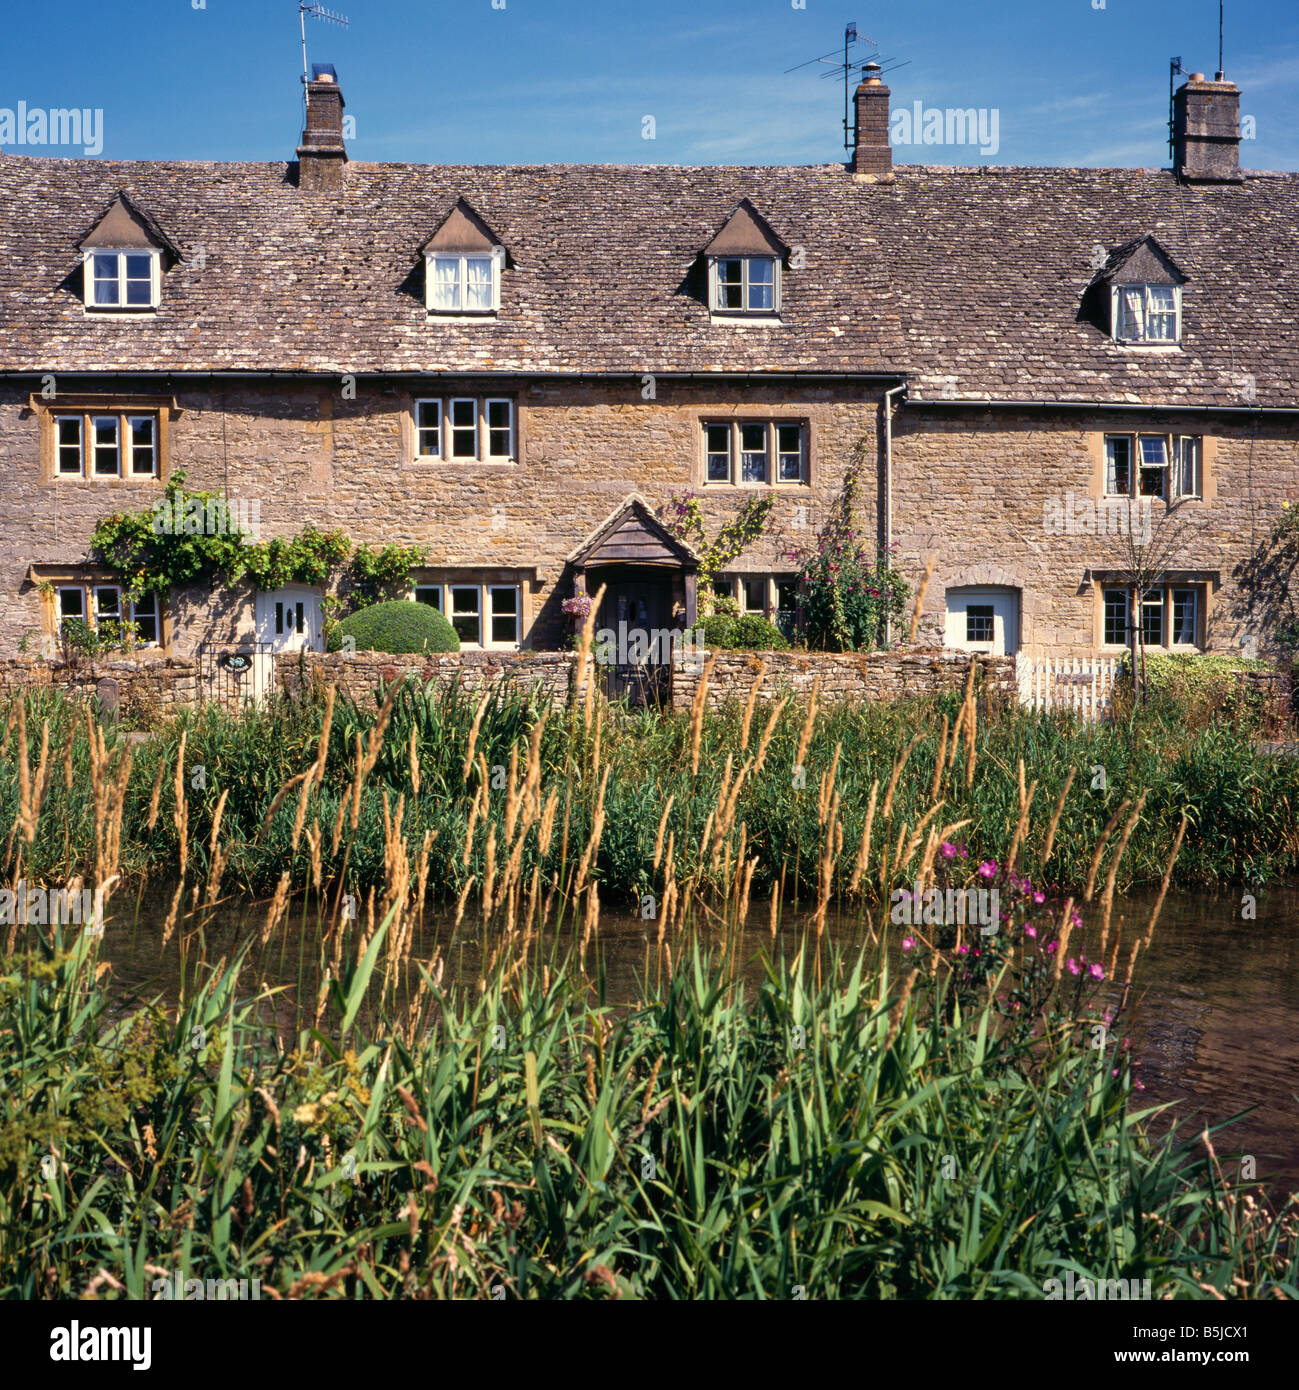 Riverside cottages, Lower Slaughter, Cotswolds, Gloucestershire, England, Regno Unito, Europa Foto Stock